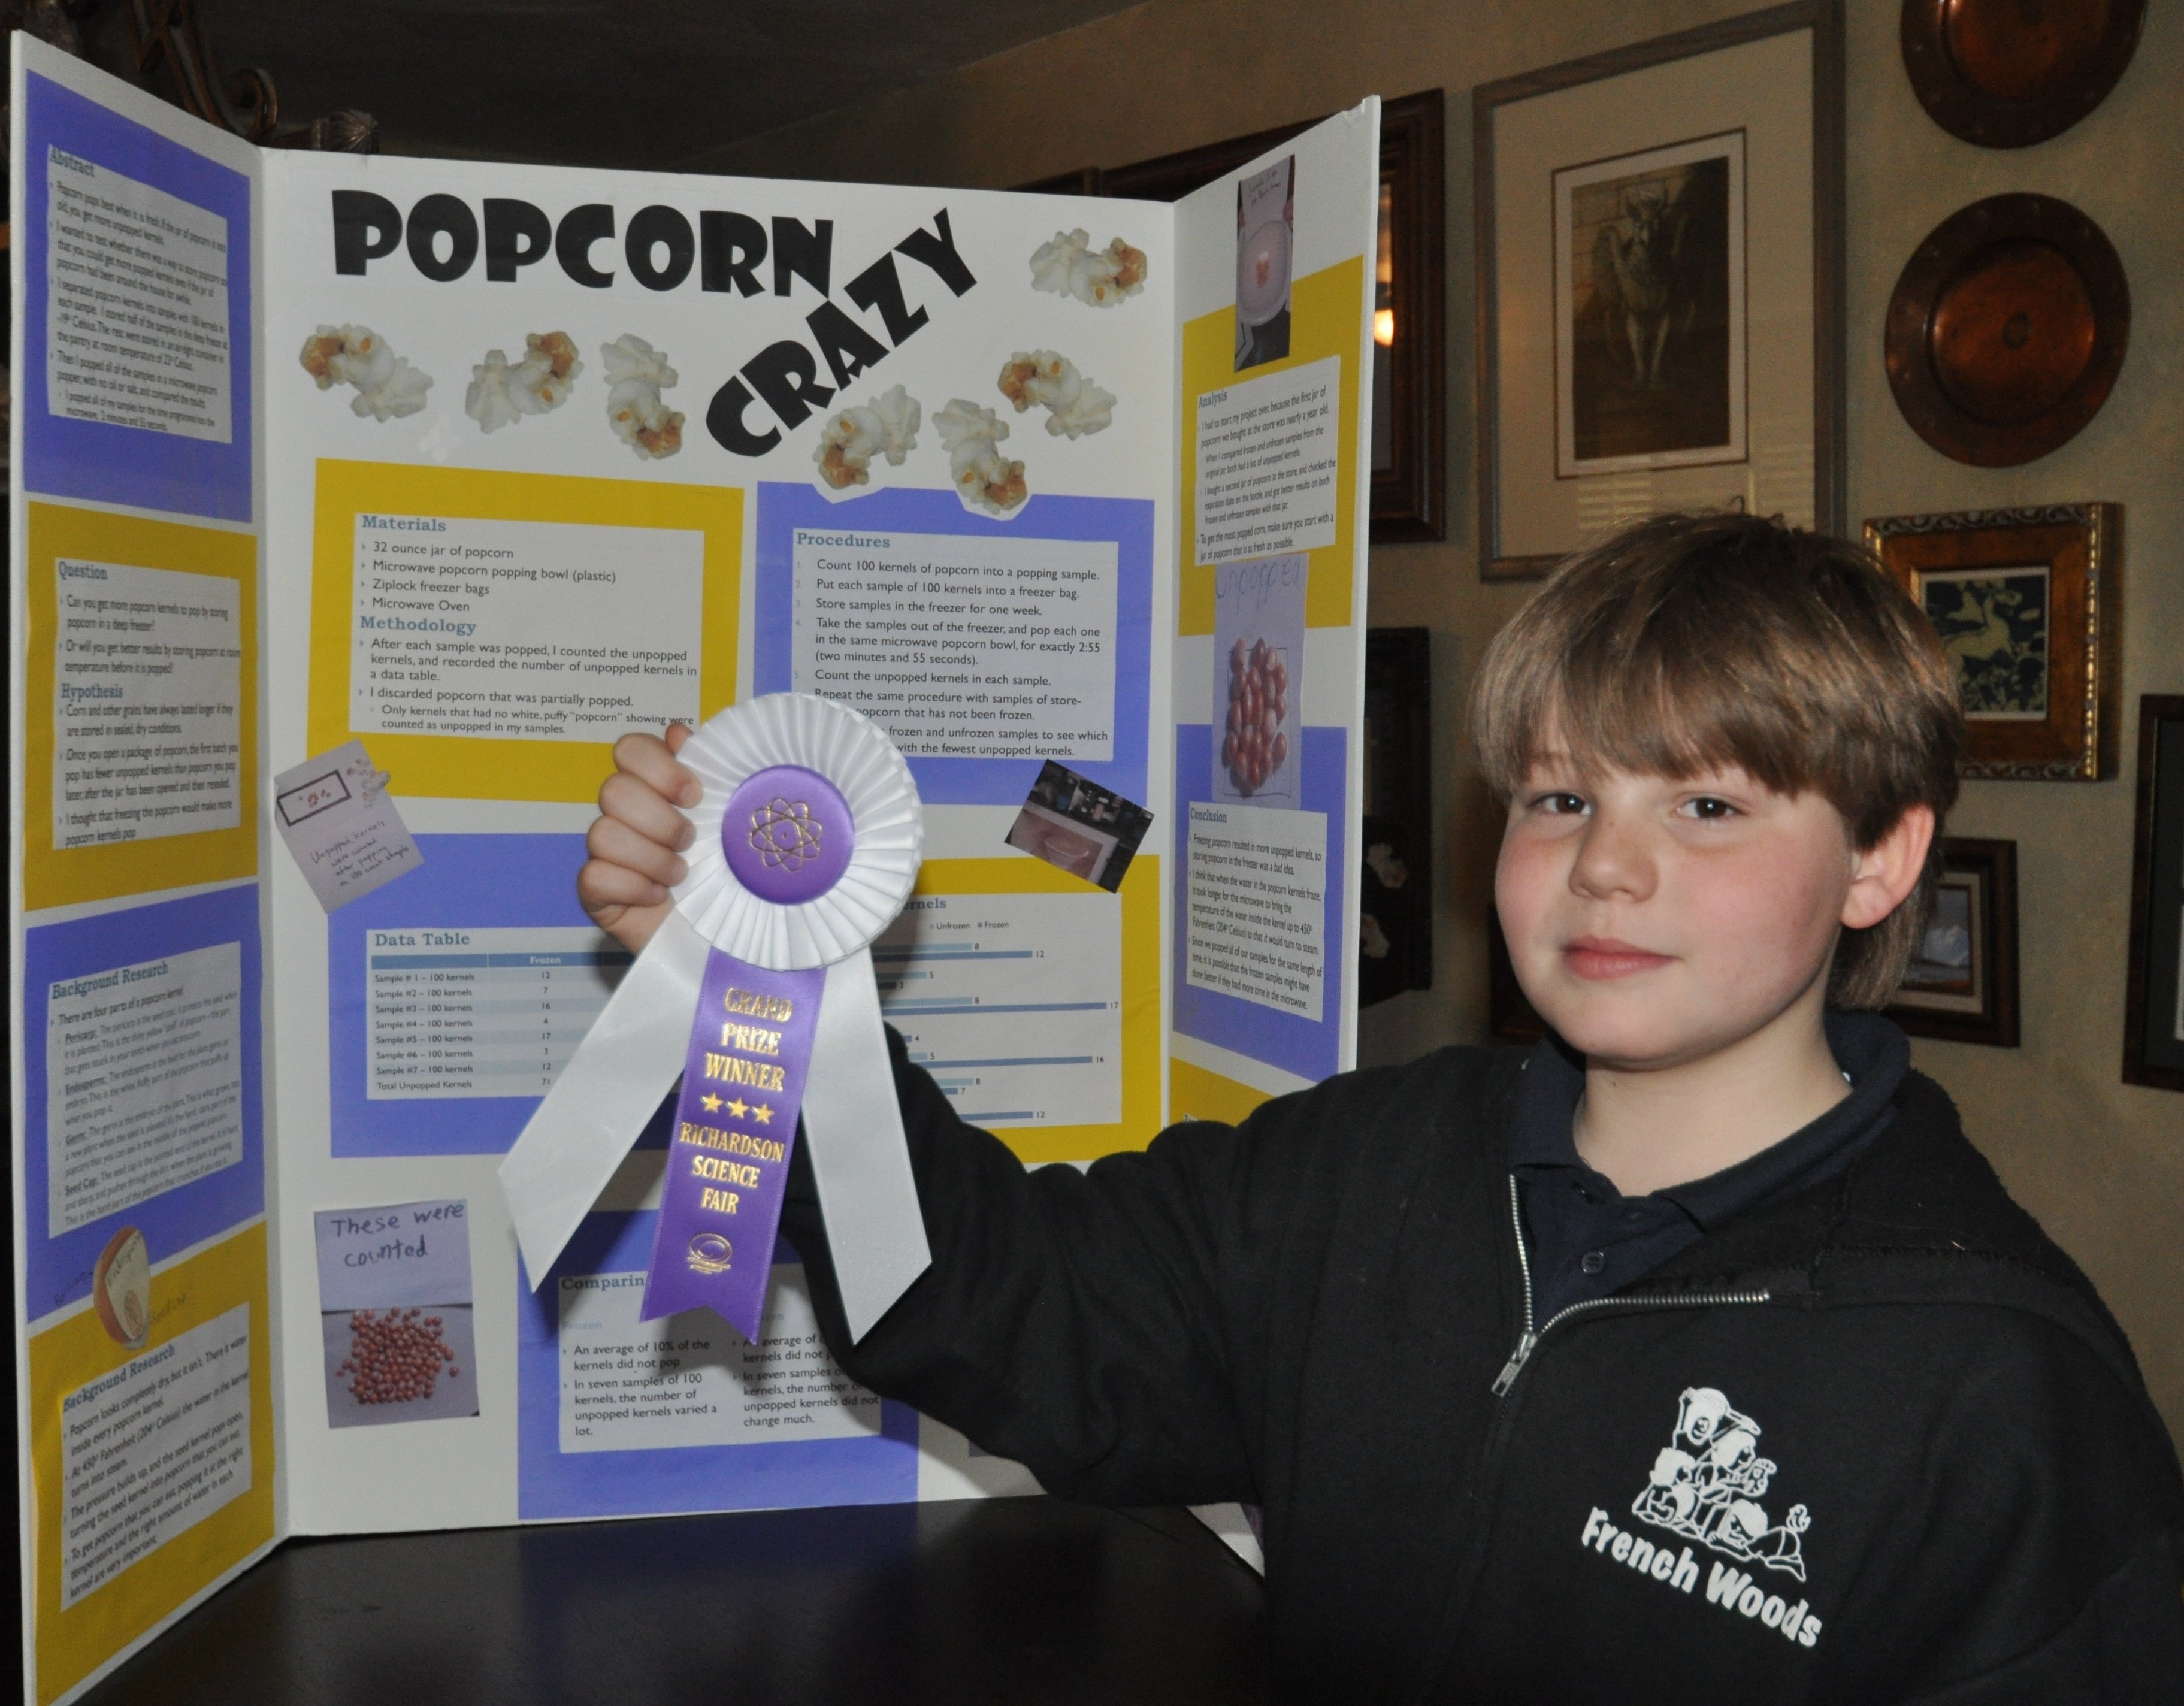 physics related science fair projects